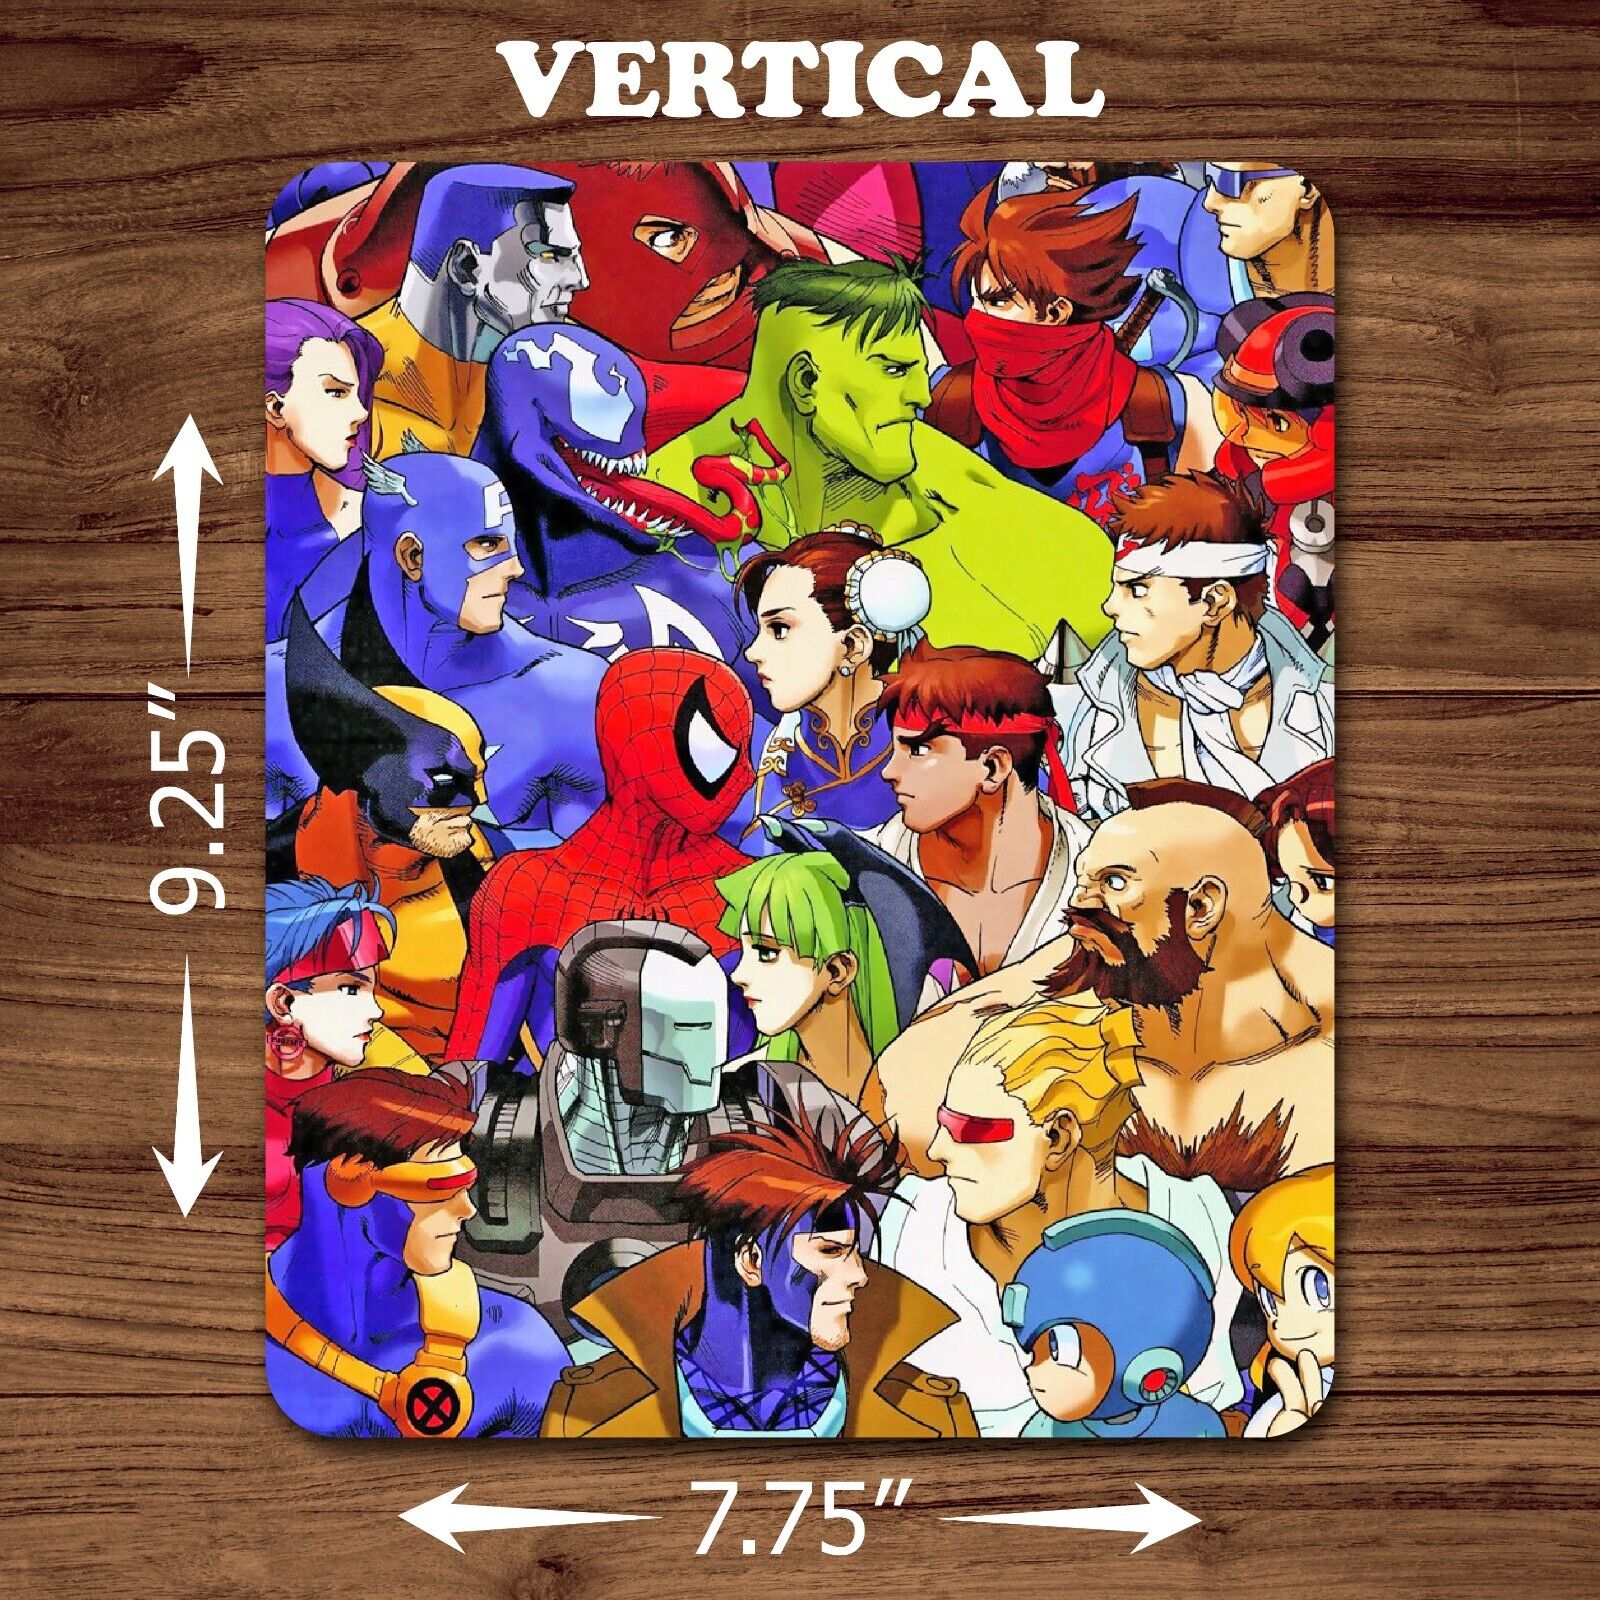 Marvel Vs Versus Capcom Street Fighter Mouse Pad Mat Mousepad Office Gaming Gift